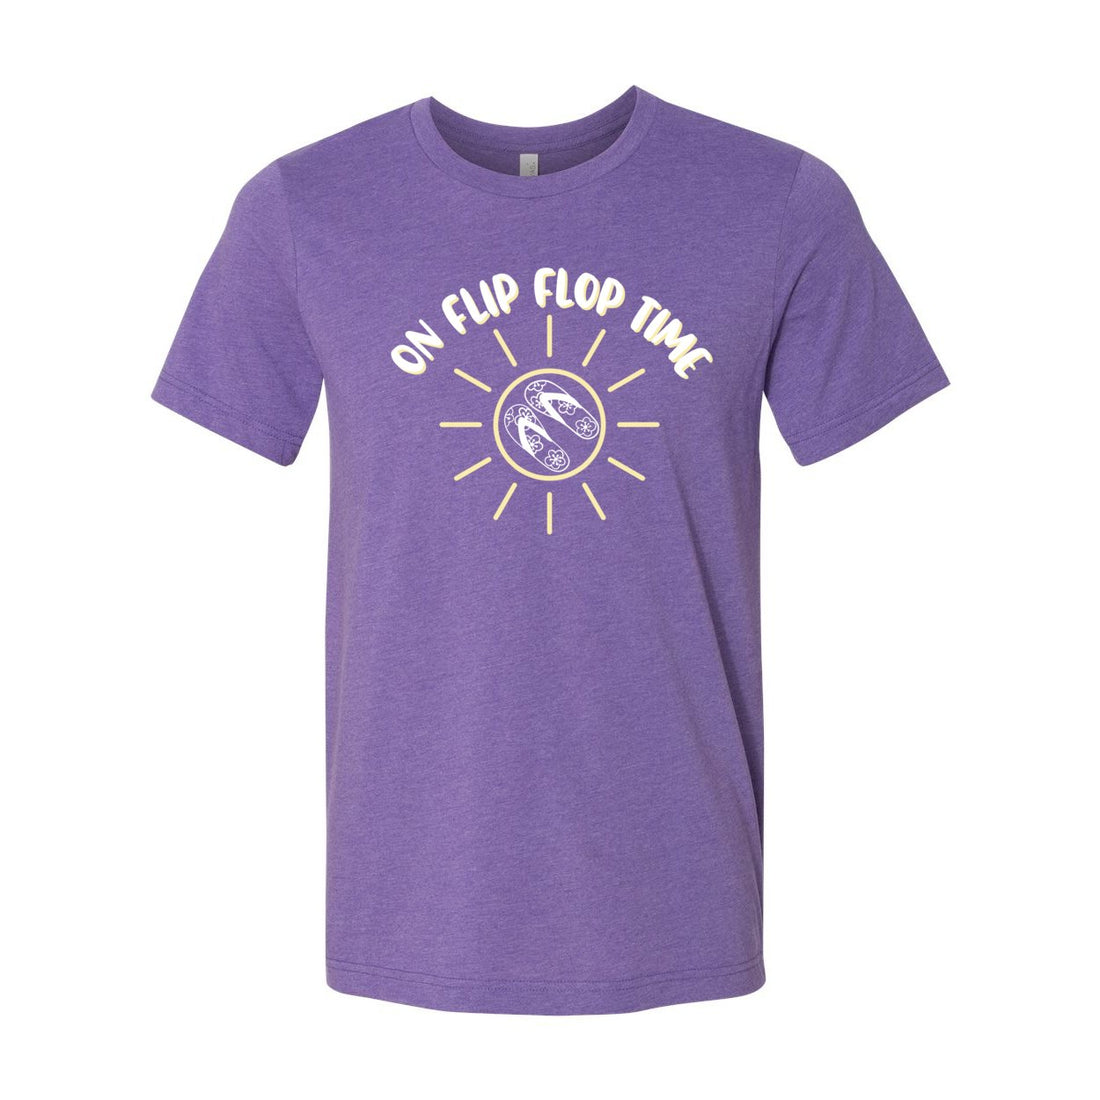 Flip Flop Time Jersey Tee - T-Shirts - Positively Sassy - Flip Flop Time Jersey Tee